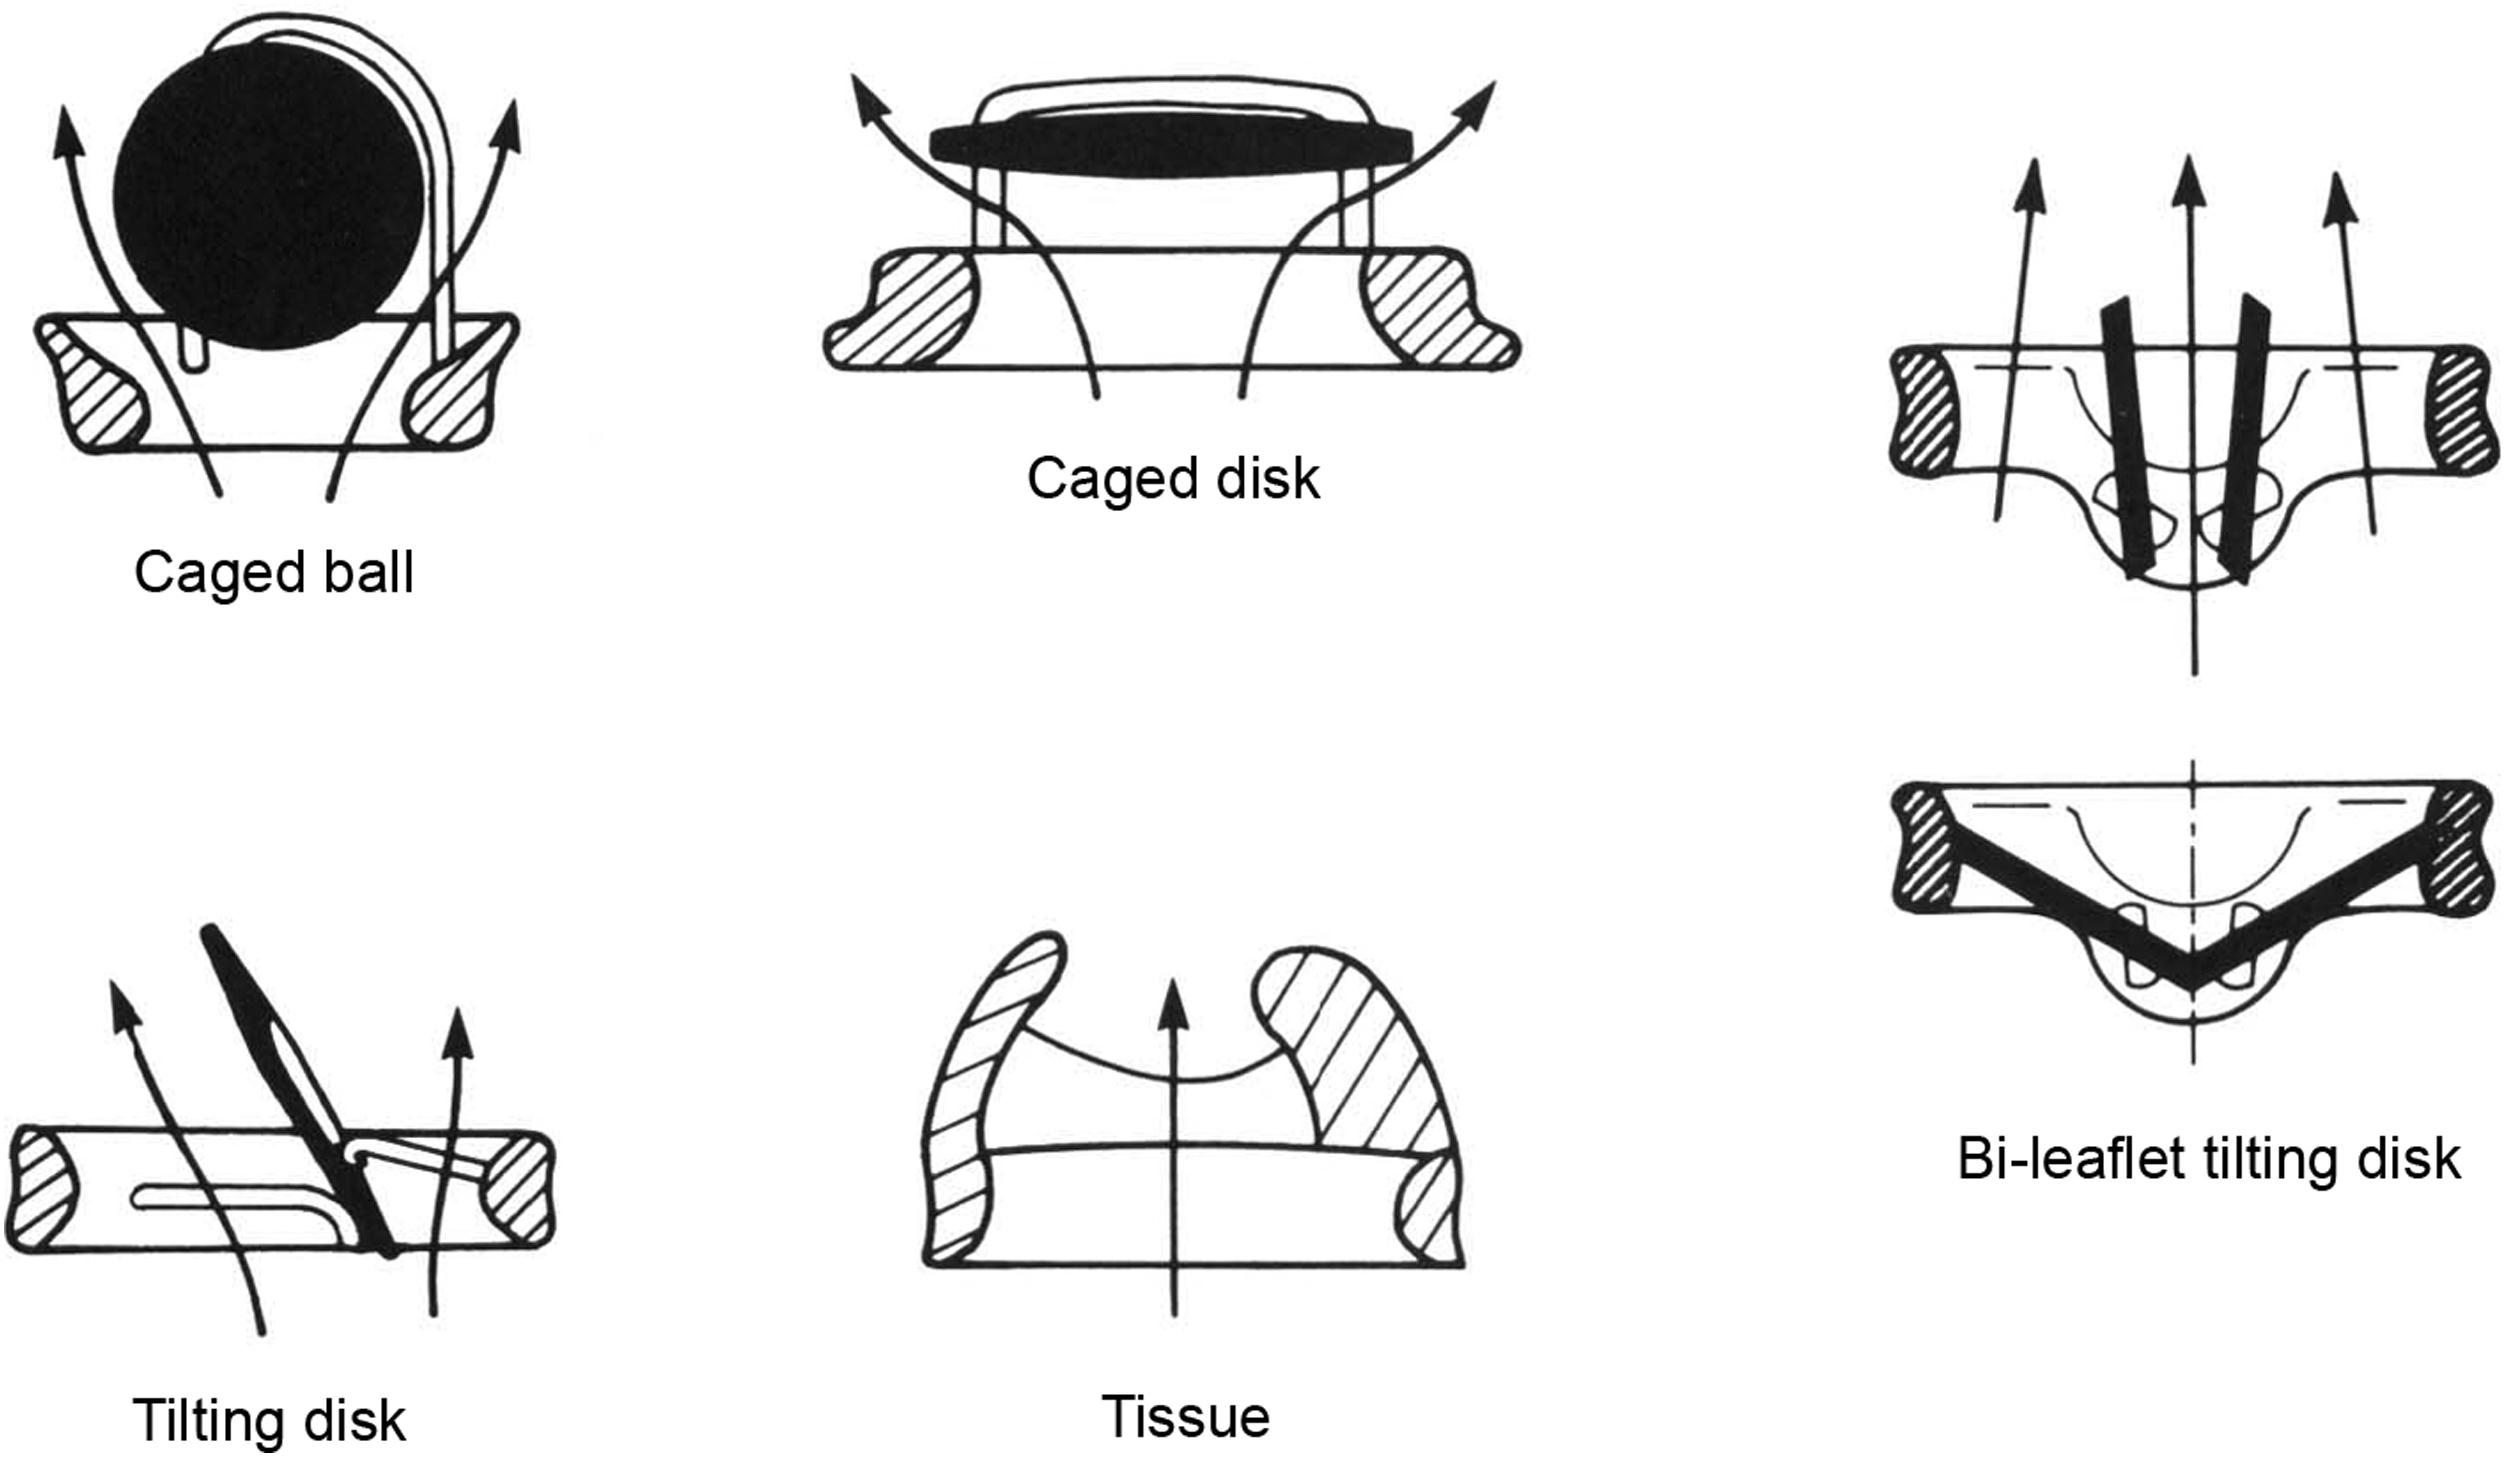 Figure 17.3, Designs and flow patterns of major categories of prosthetic heart valves: caged-ball, caged-disk, tilting-disk, bileaflet tilting-disk, and bioprosthetic (tissue) valves. Whereas flow in mechanical valves must course along both sides of the occluder, bioprostheses have a central flow pattern.